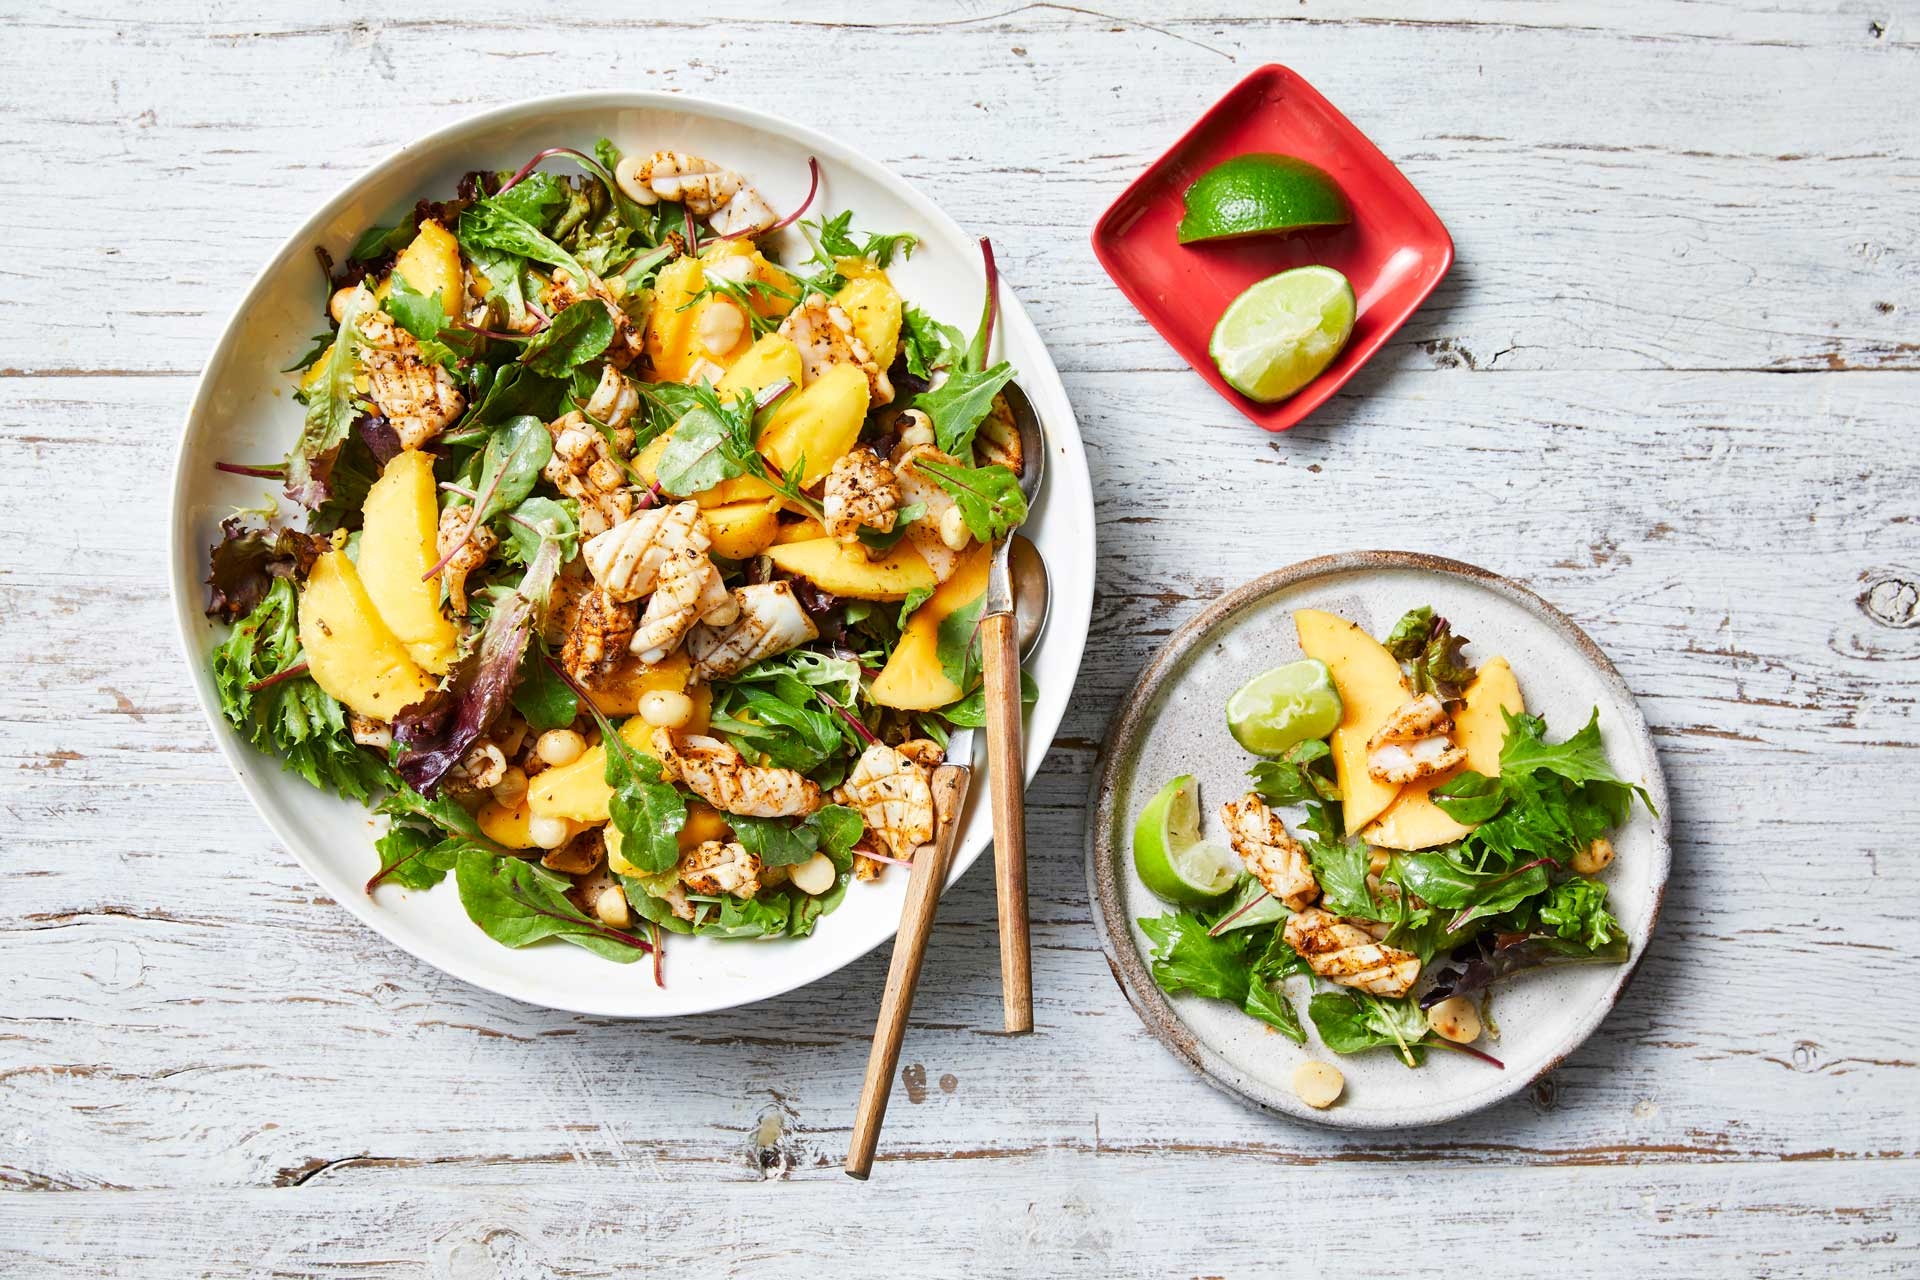 This salad is a tropical delight with sweet mango, savory chicken, and tangy lime. A perfect summer dish.